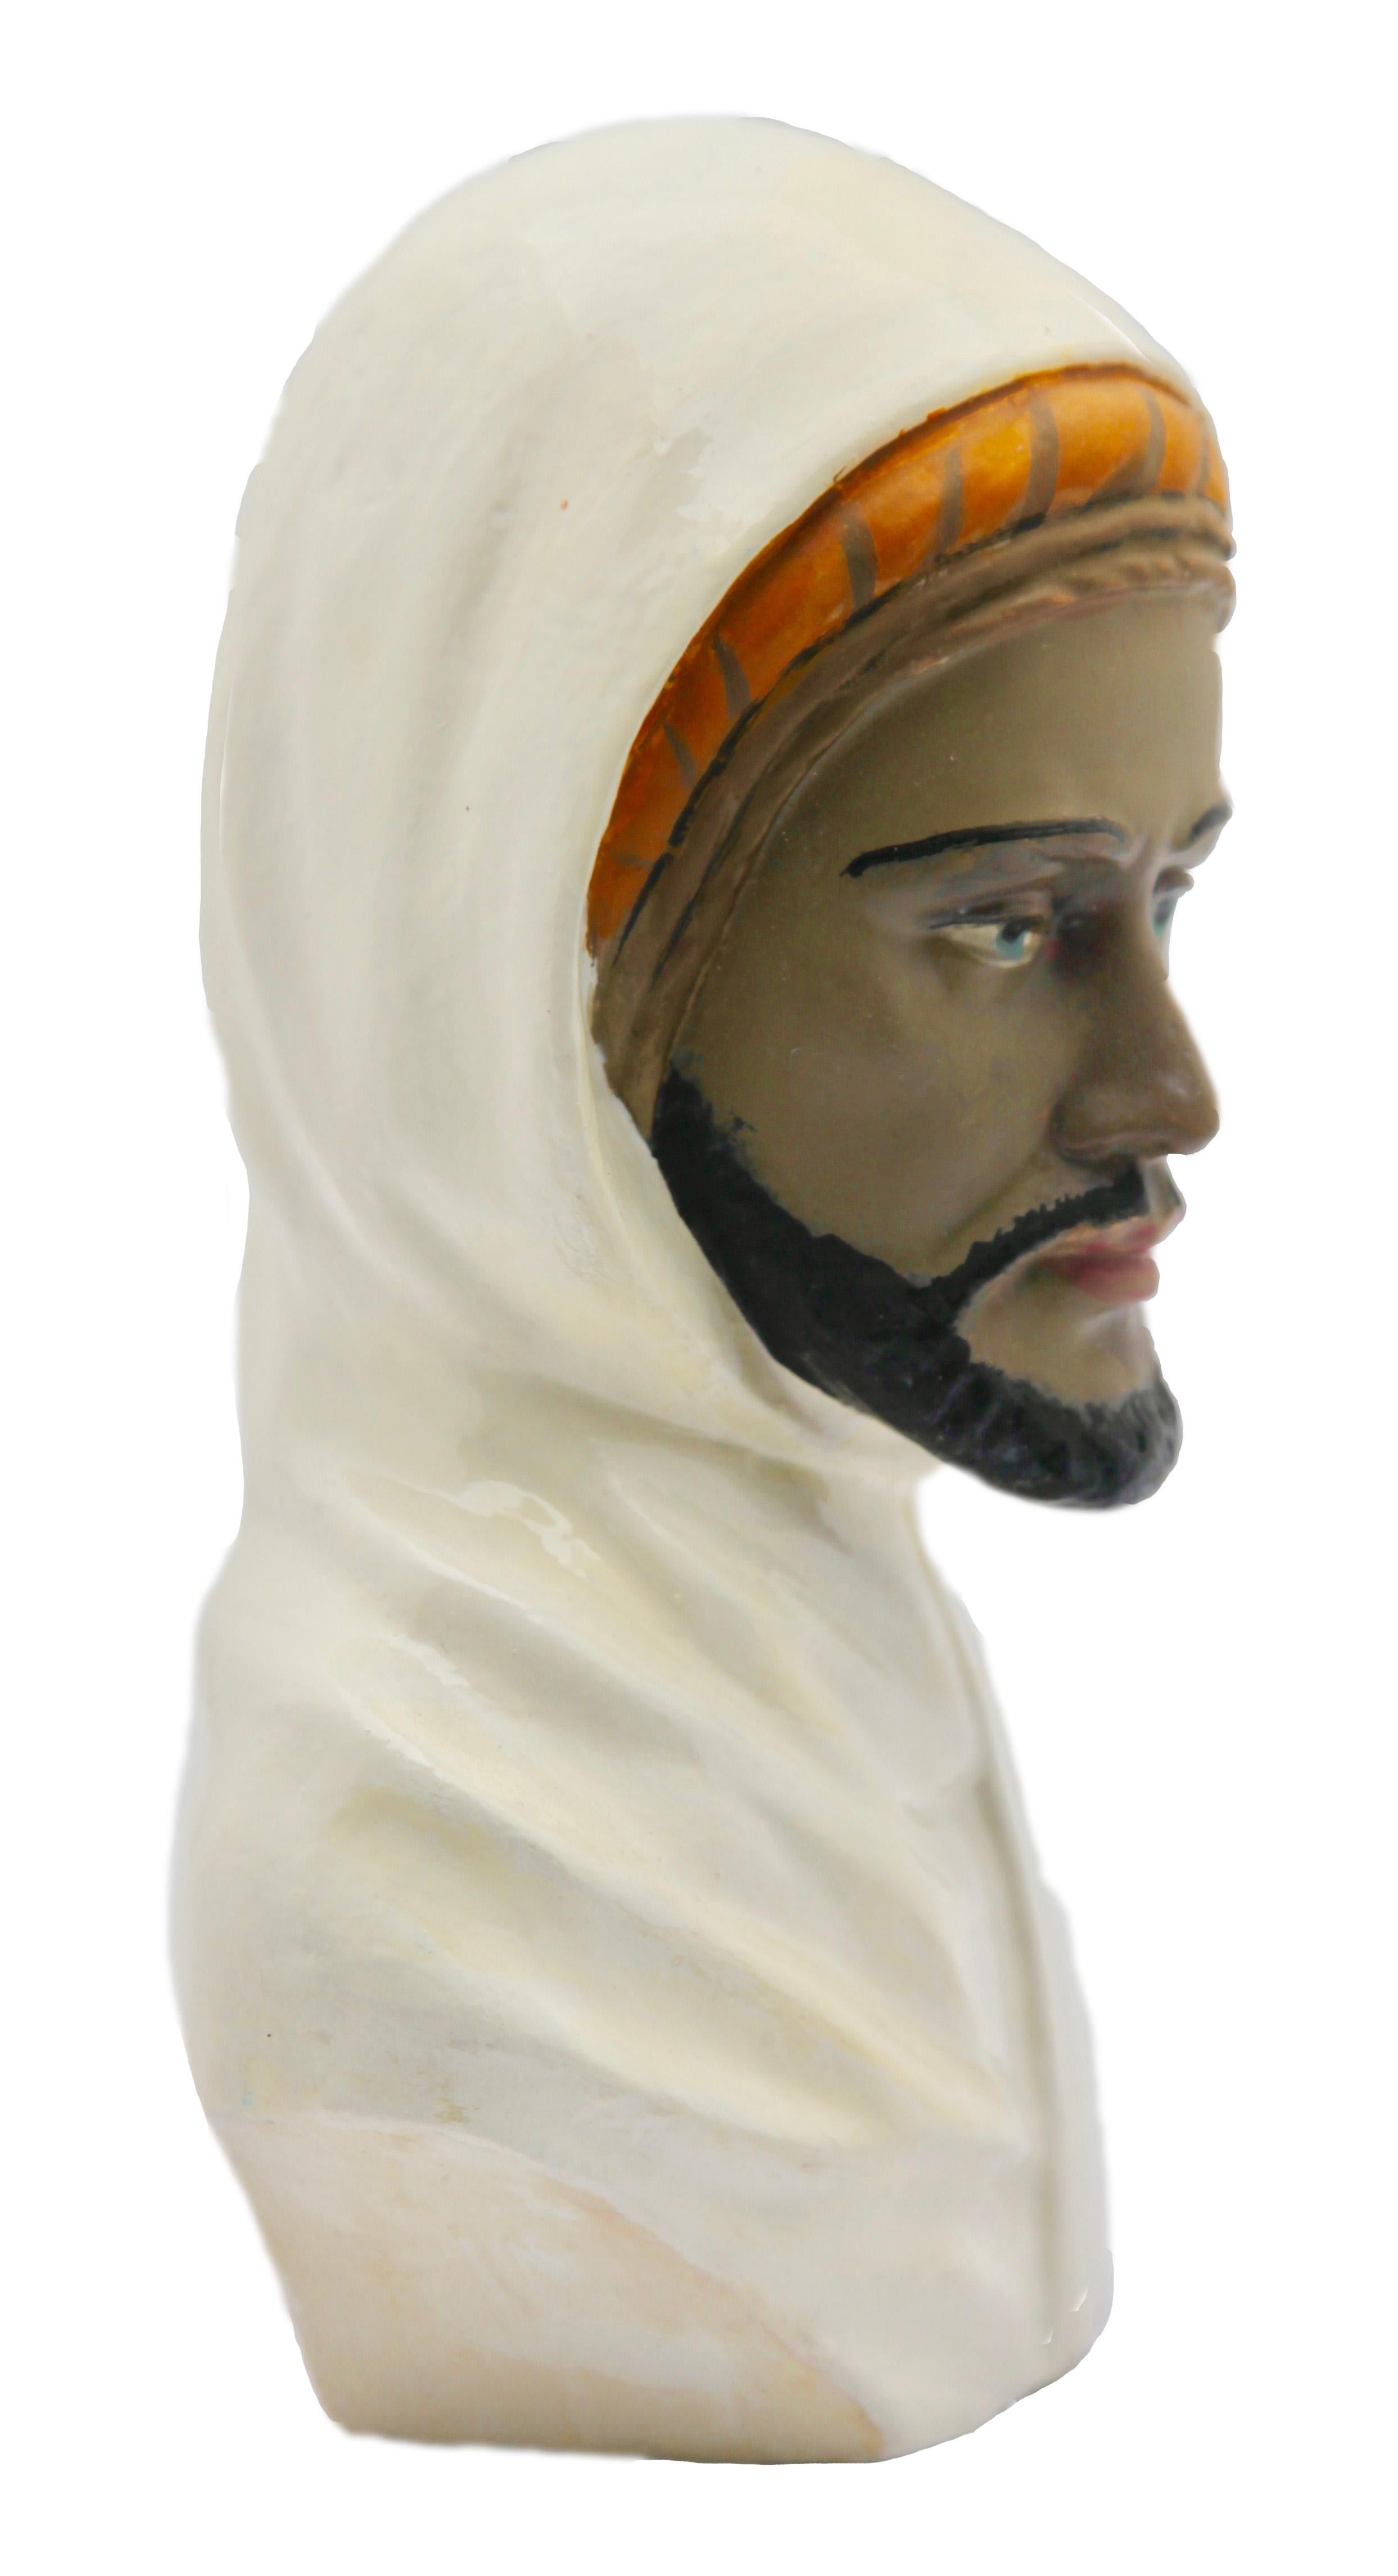 Art Nouveau Guiseppe Carli Signed, Polychrome Ceramic Bust of an Arab Head For Sale